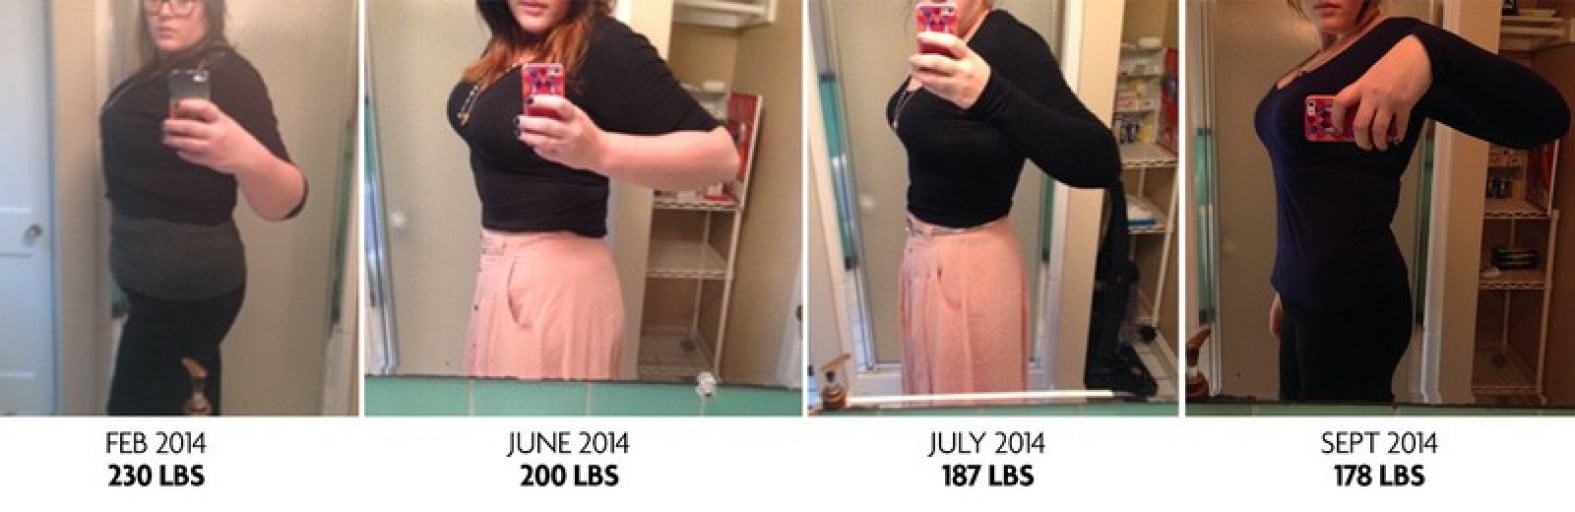 A picture of a 5'11" female showing a fat loss from 250 pounds to 178 pounds. A net loss of 72 pounds.